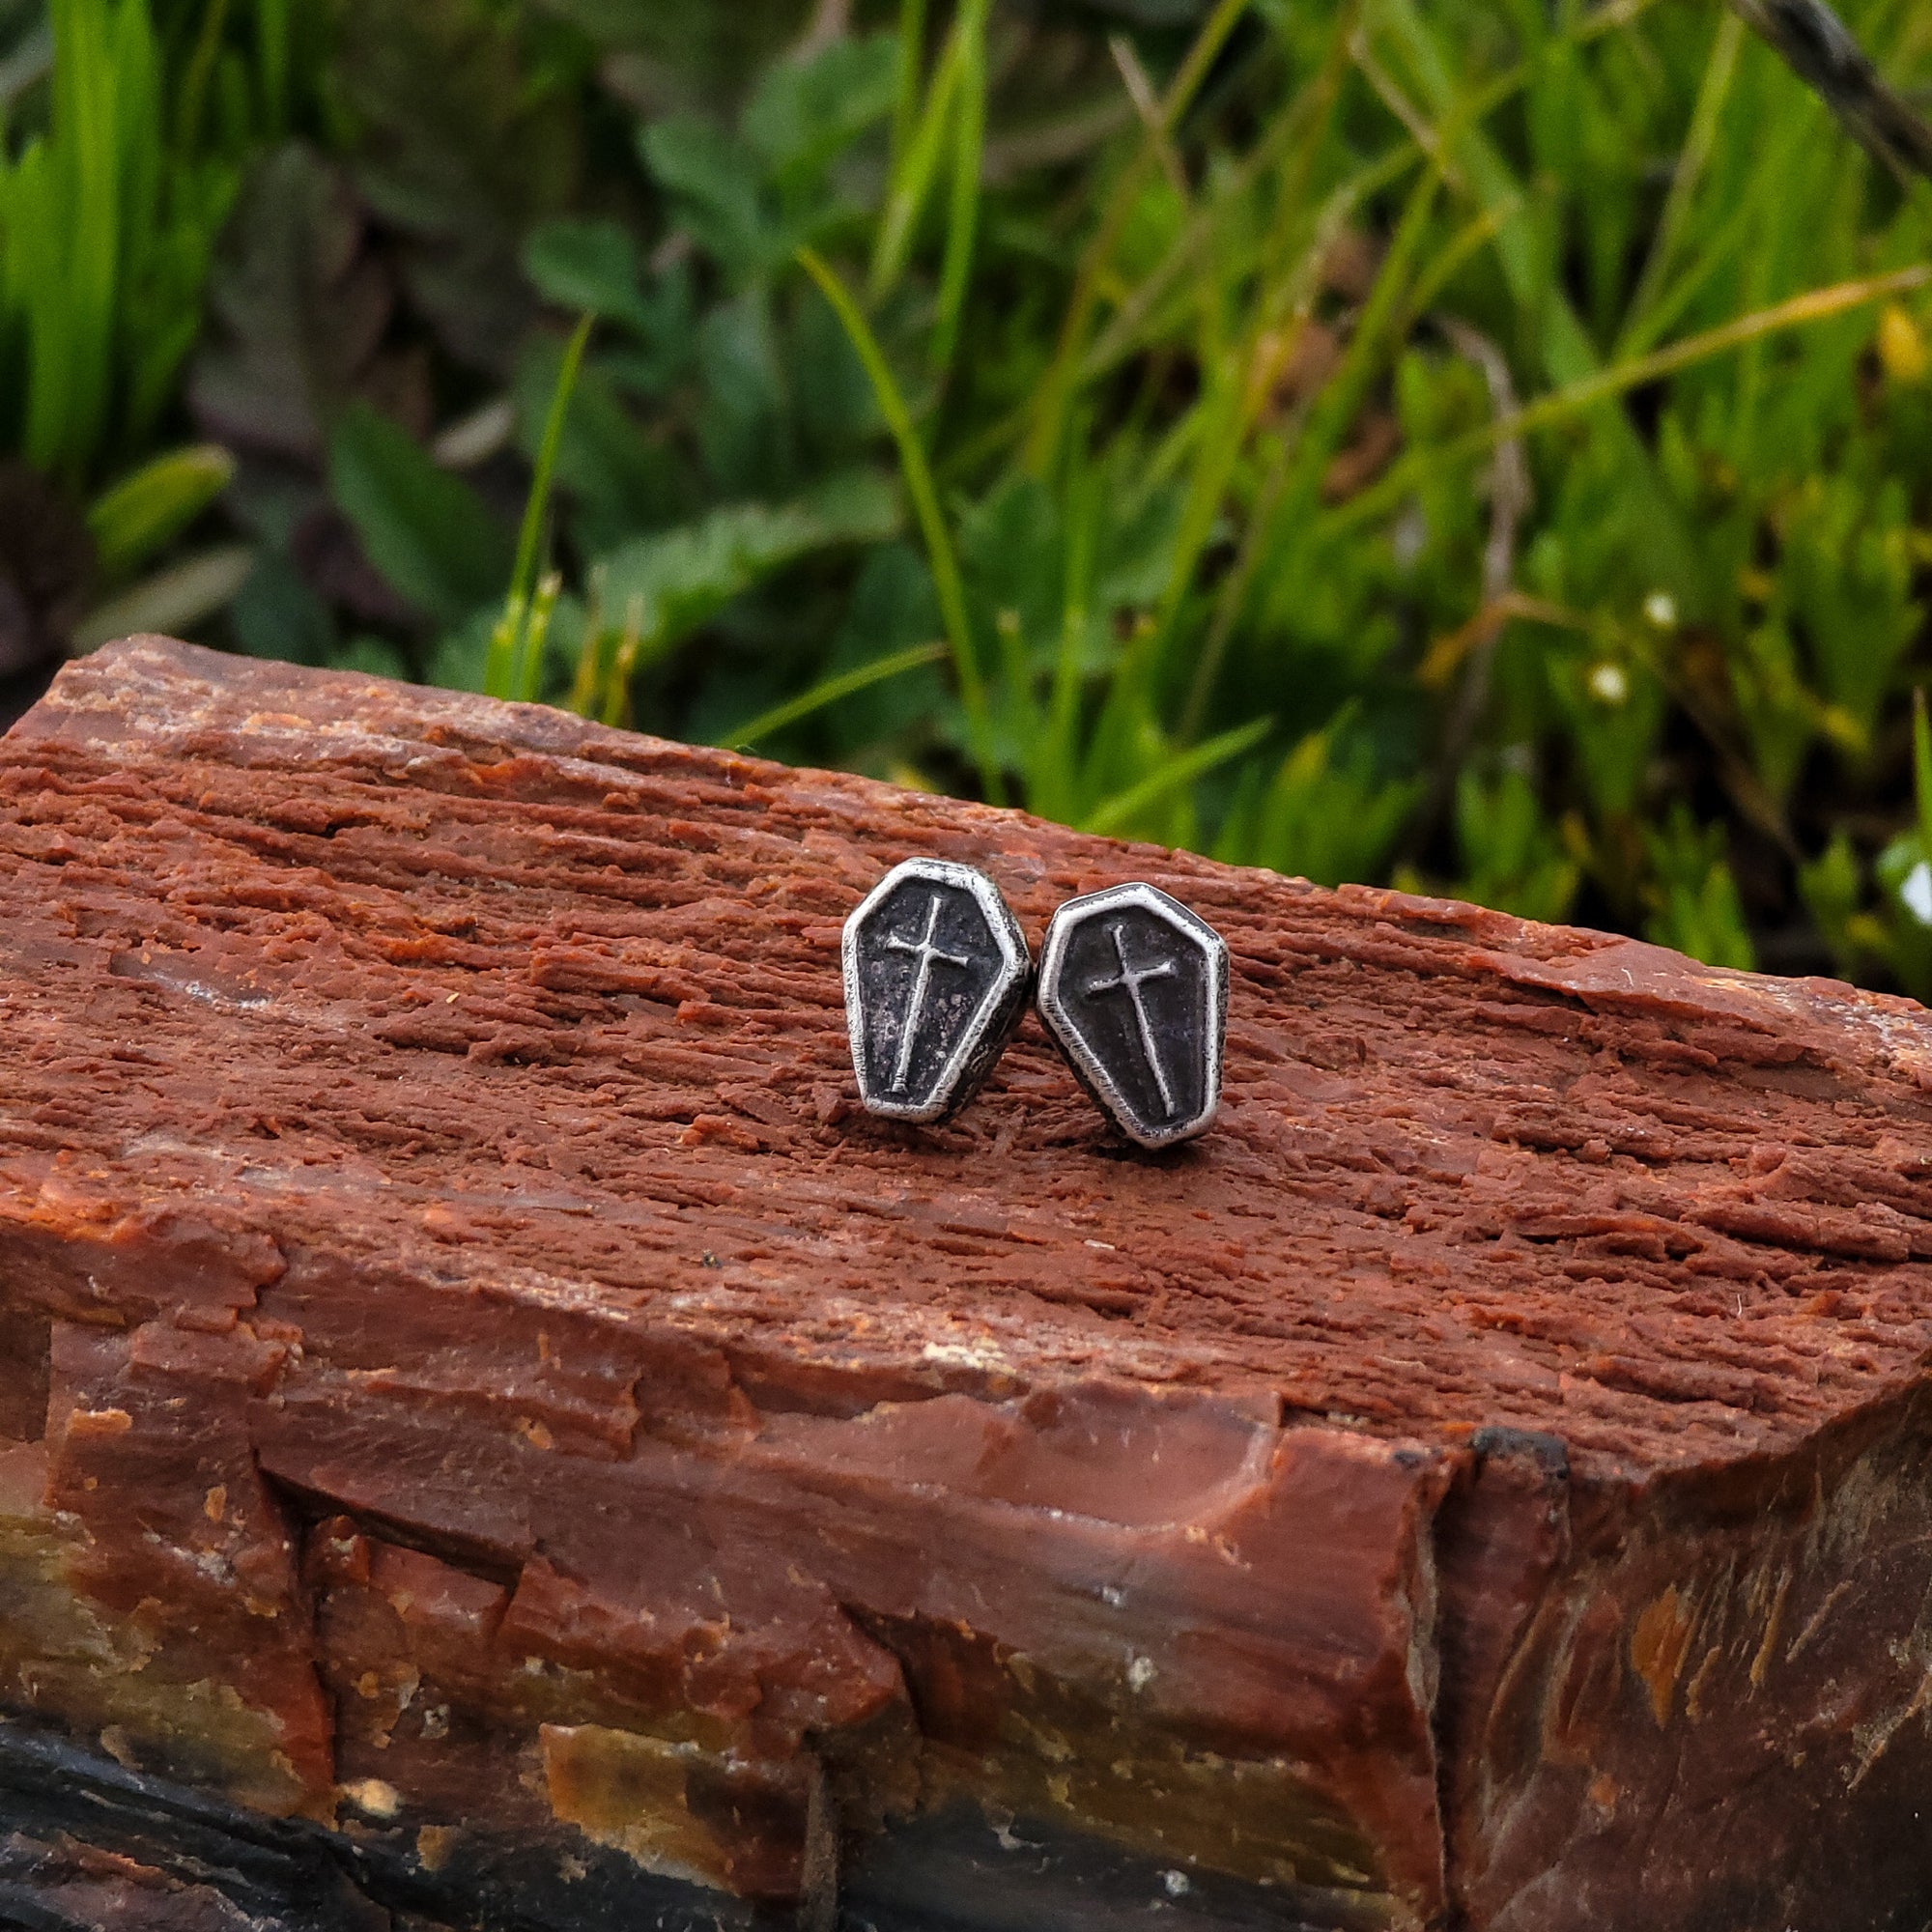 These earrings are handcrafted in the shape of small coffins. The earrings are resting on a natural piece of wood. Surrounding the earrings are lush green leaves.